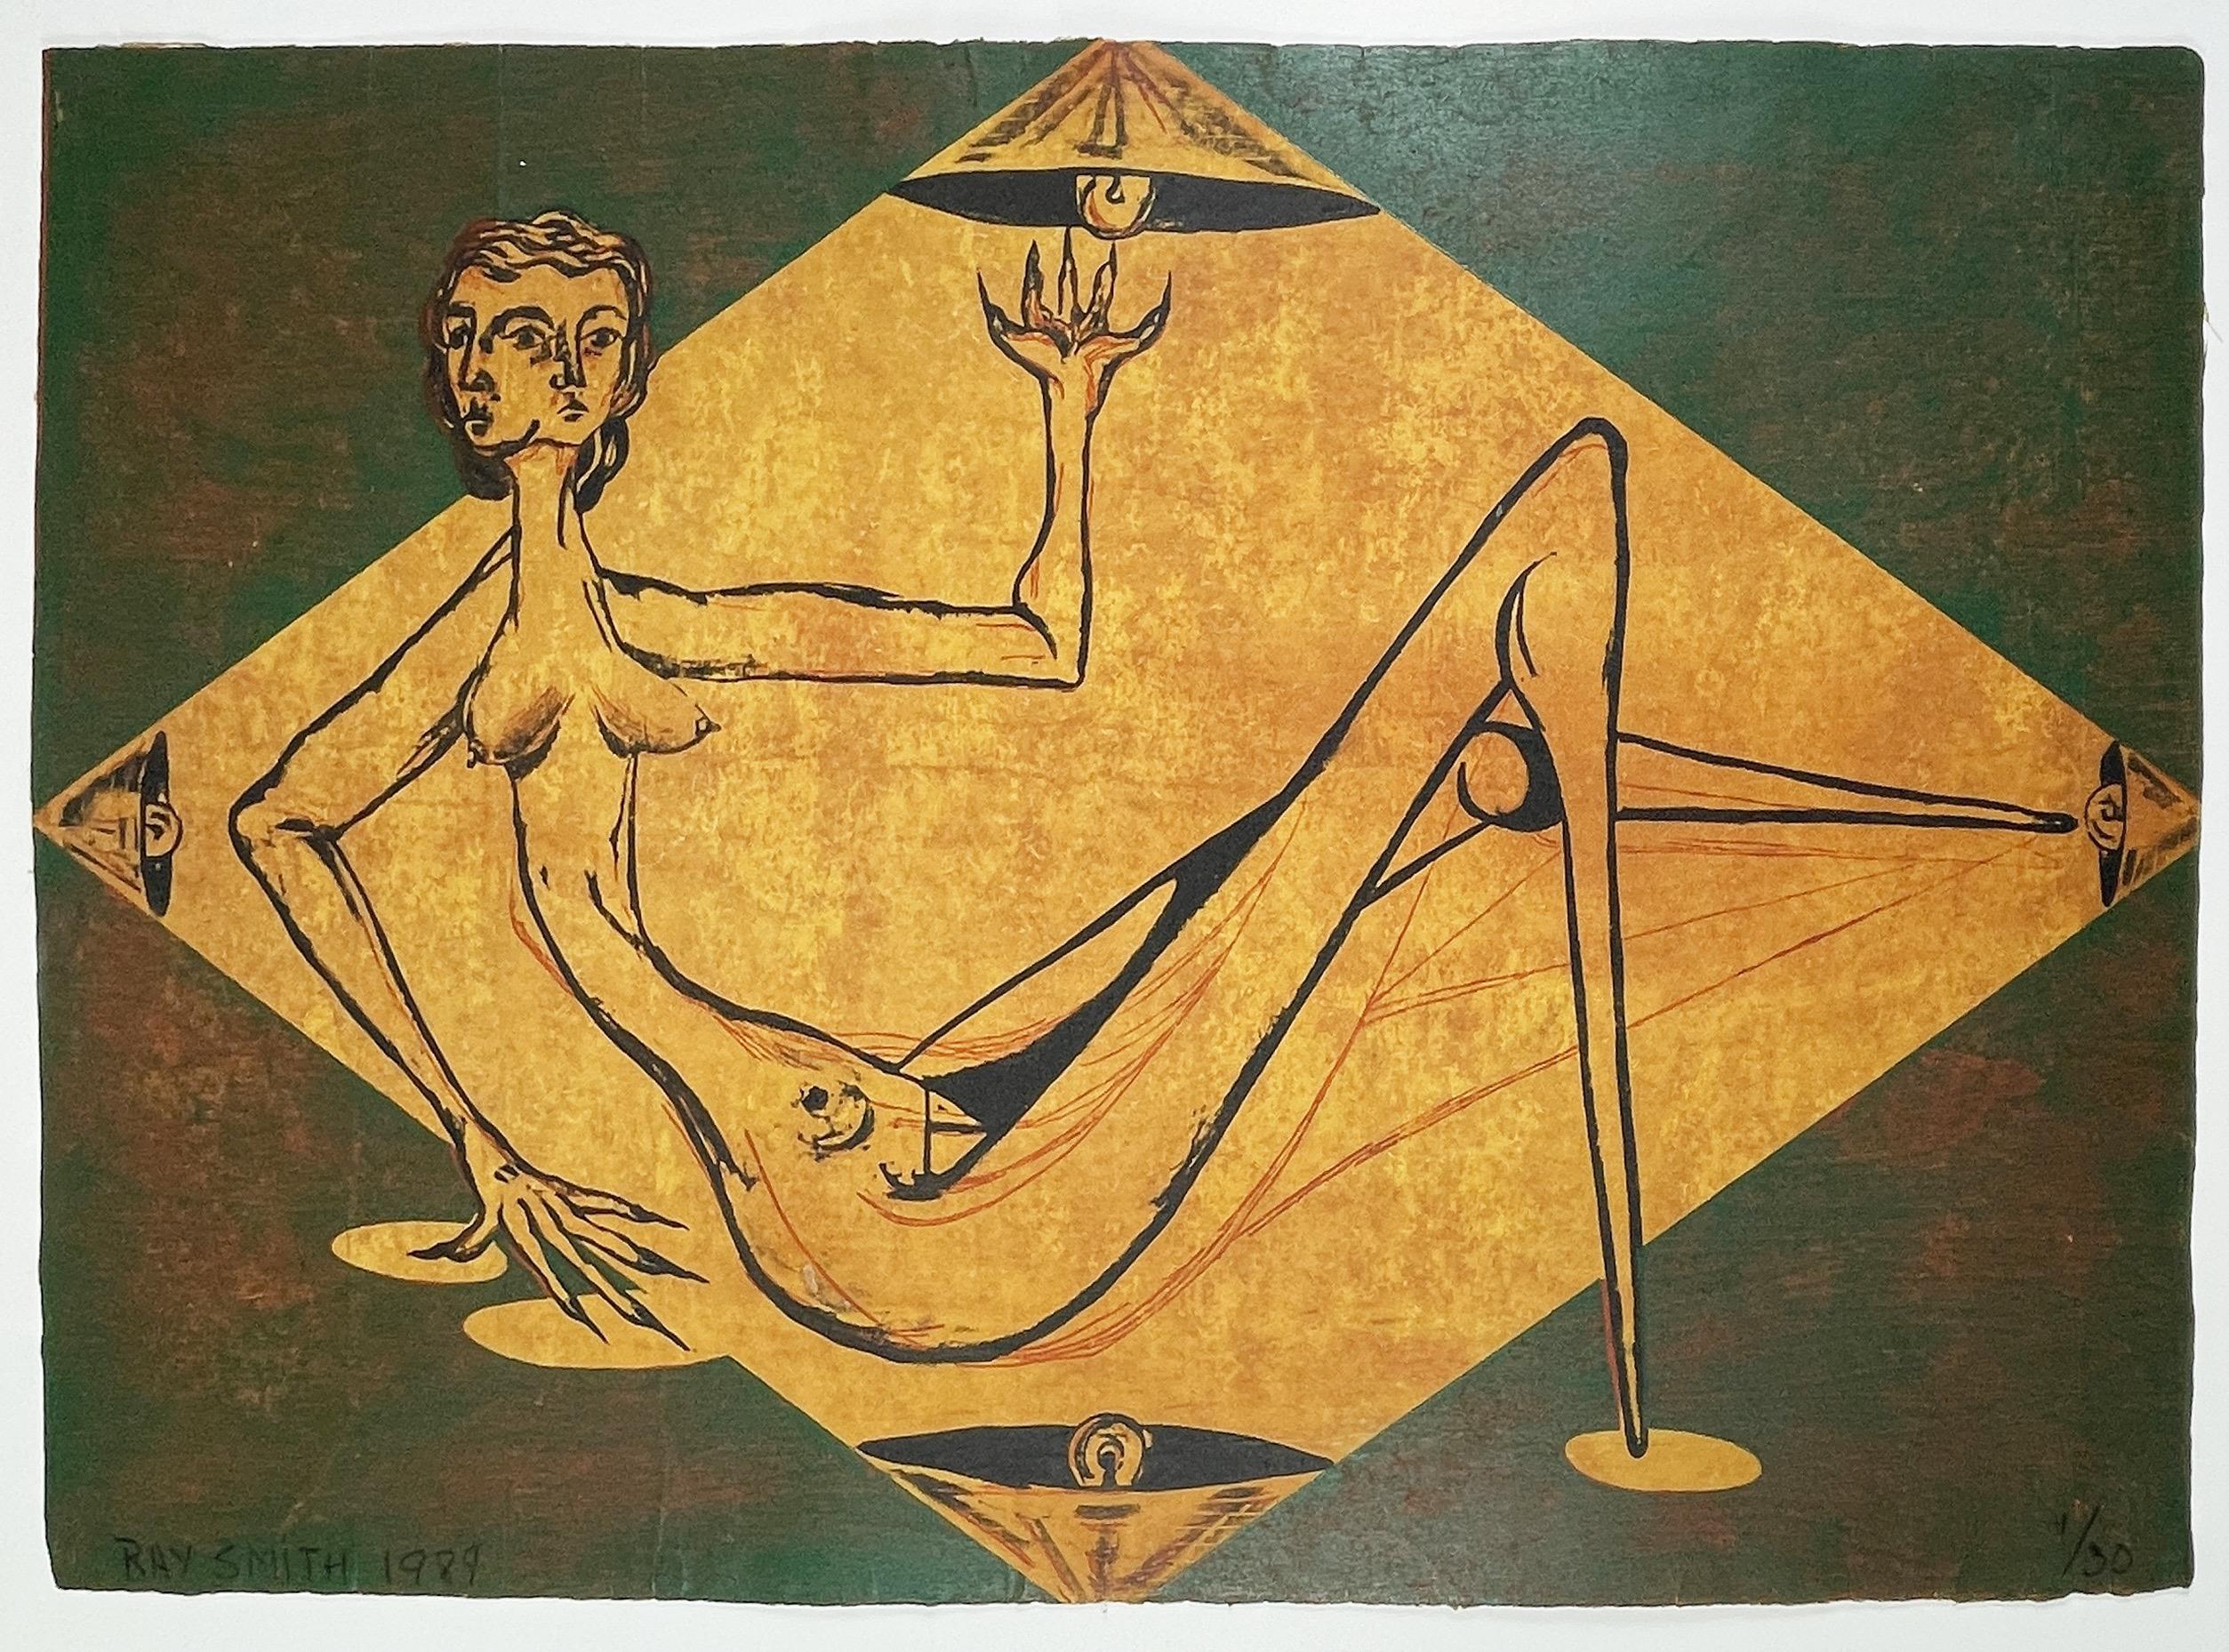 Sueño de un Boy Scout by Ray Smith surreal nude print in green and yellow